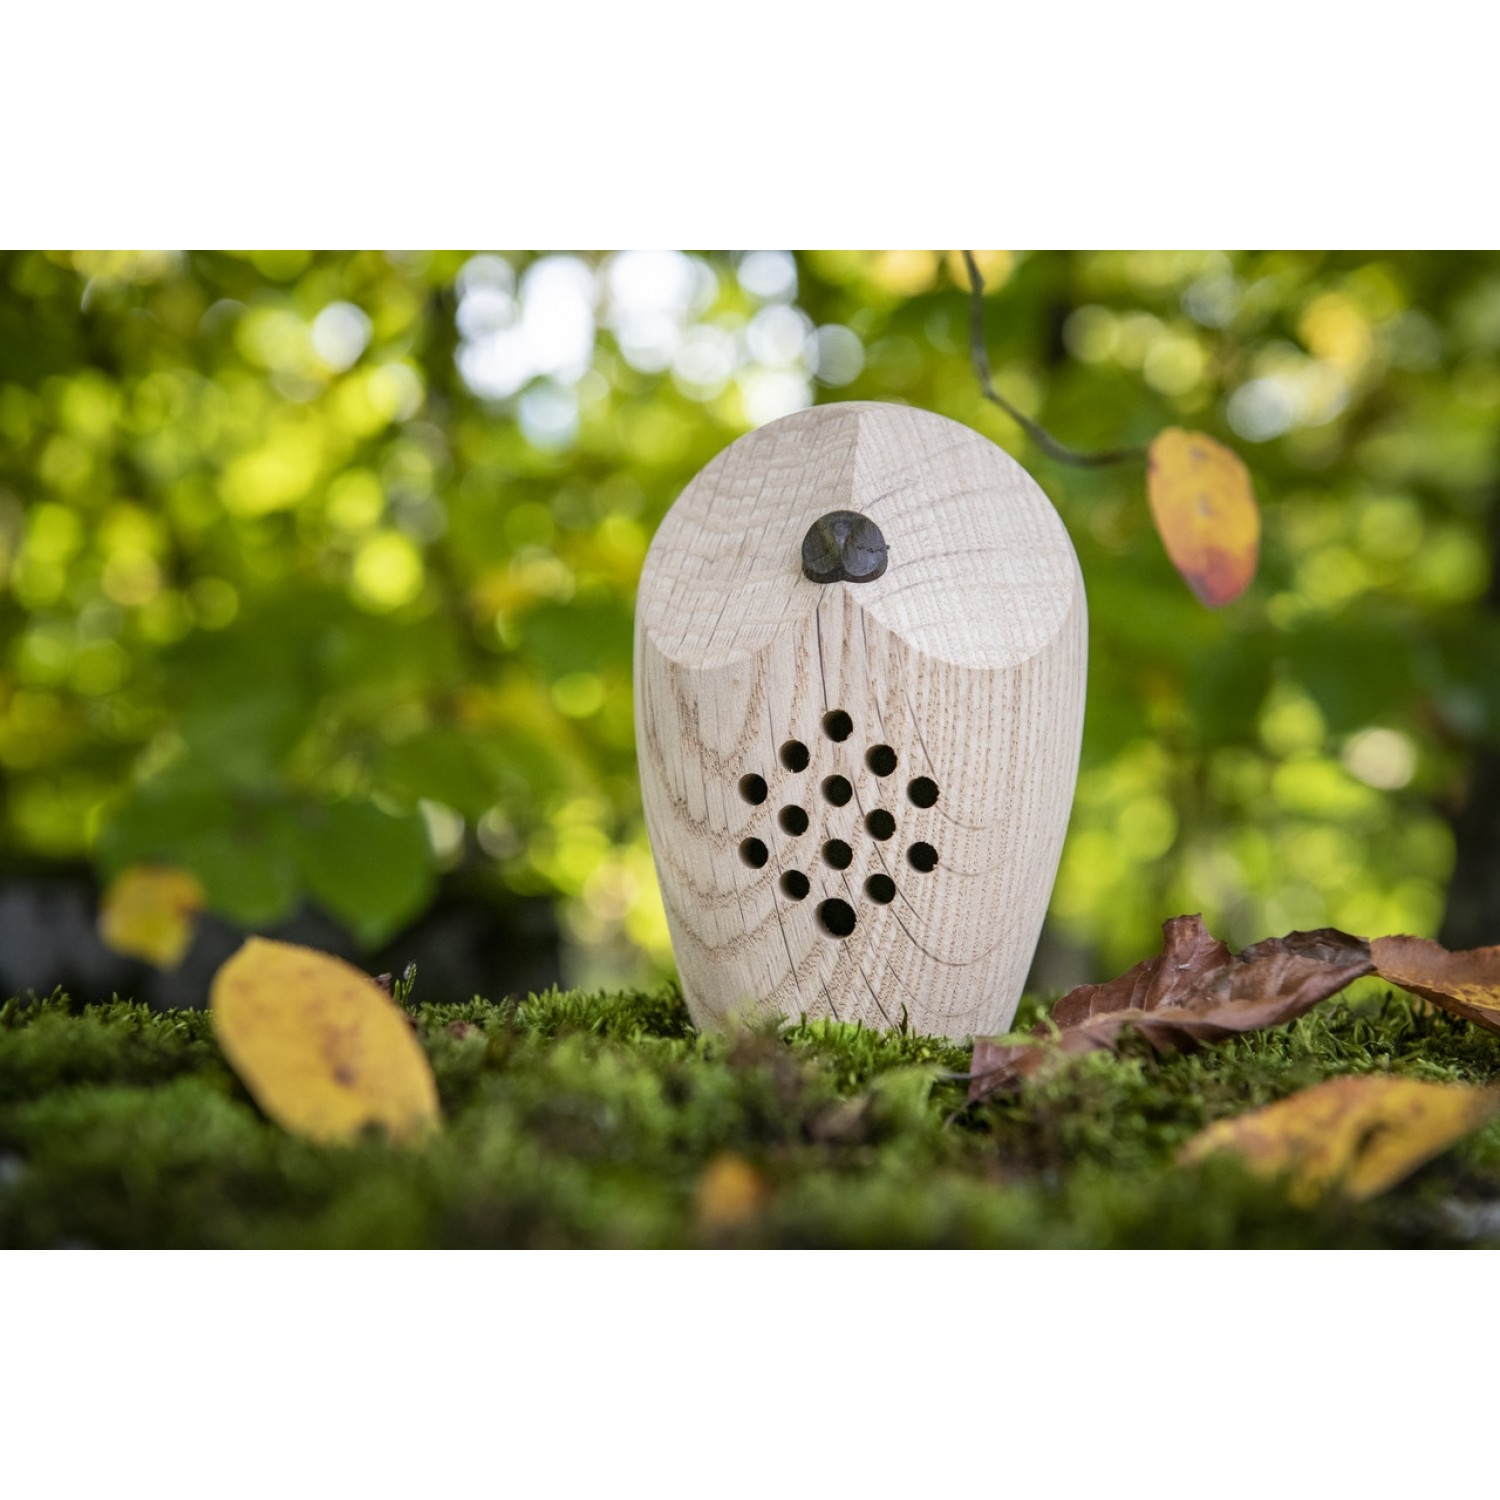 Motion Sensor HUURI with forest sounds | Nature’s Design